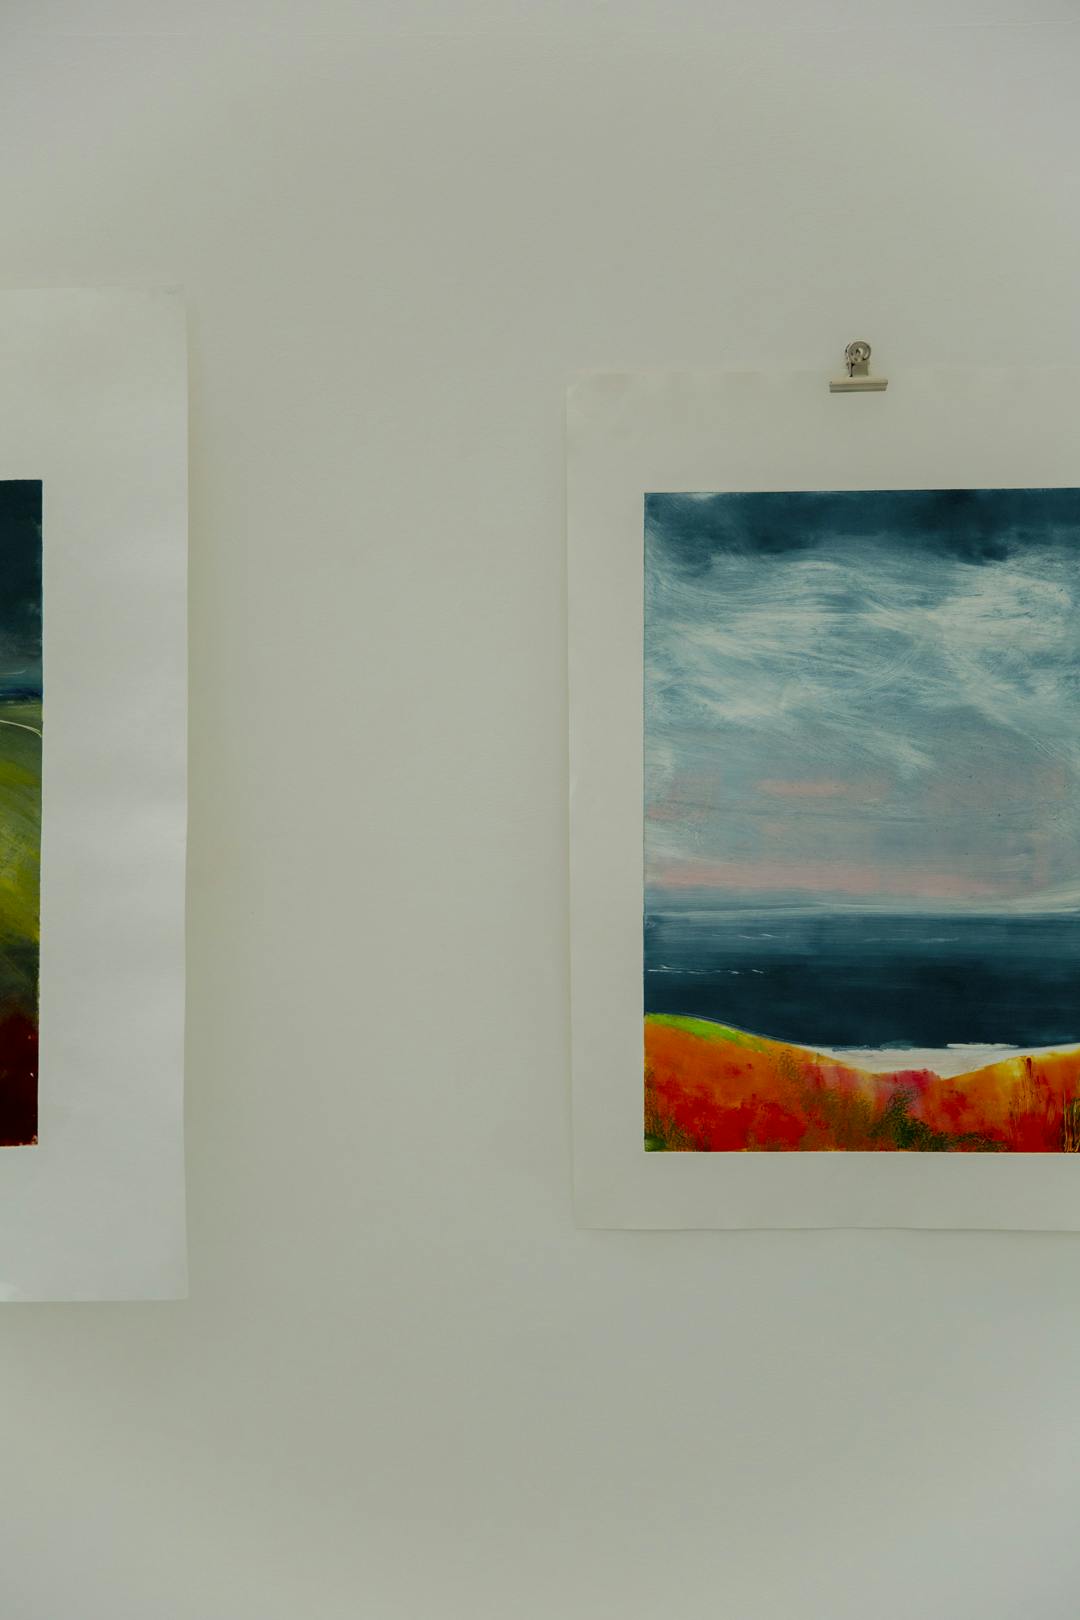 Image shows Martine's work hung up in the gallery space with one half of a painting on the left and another half of a painting on the right. The painting features blues and orange.